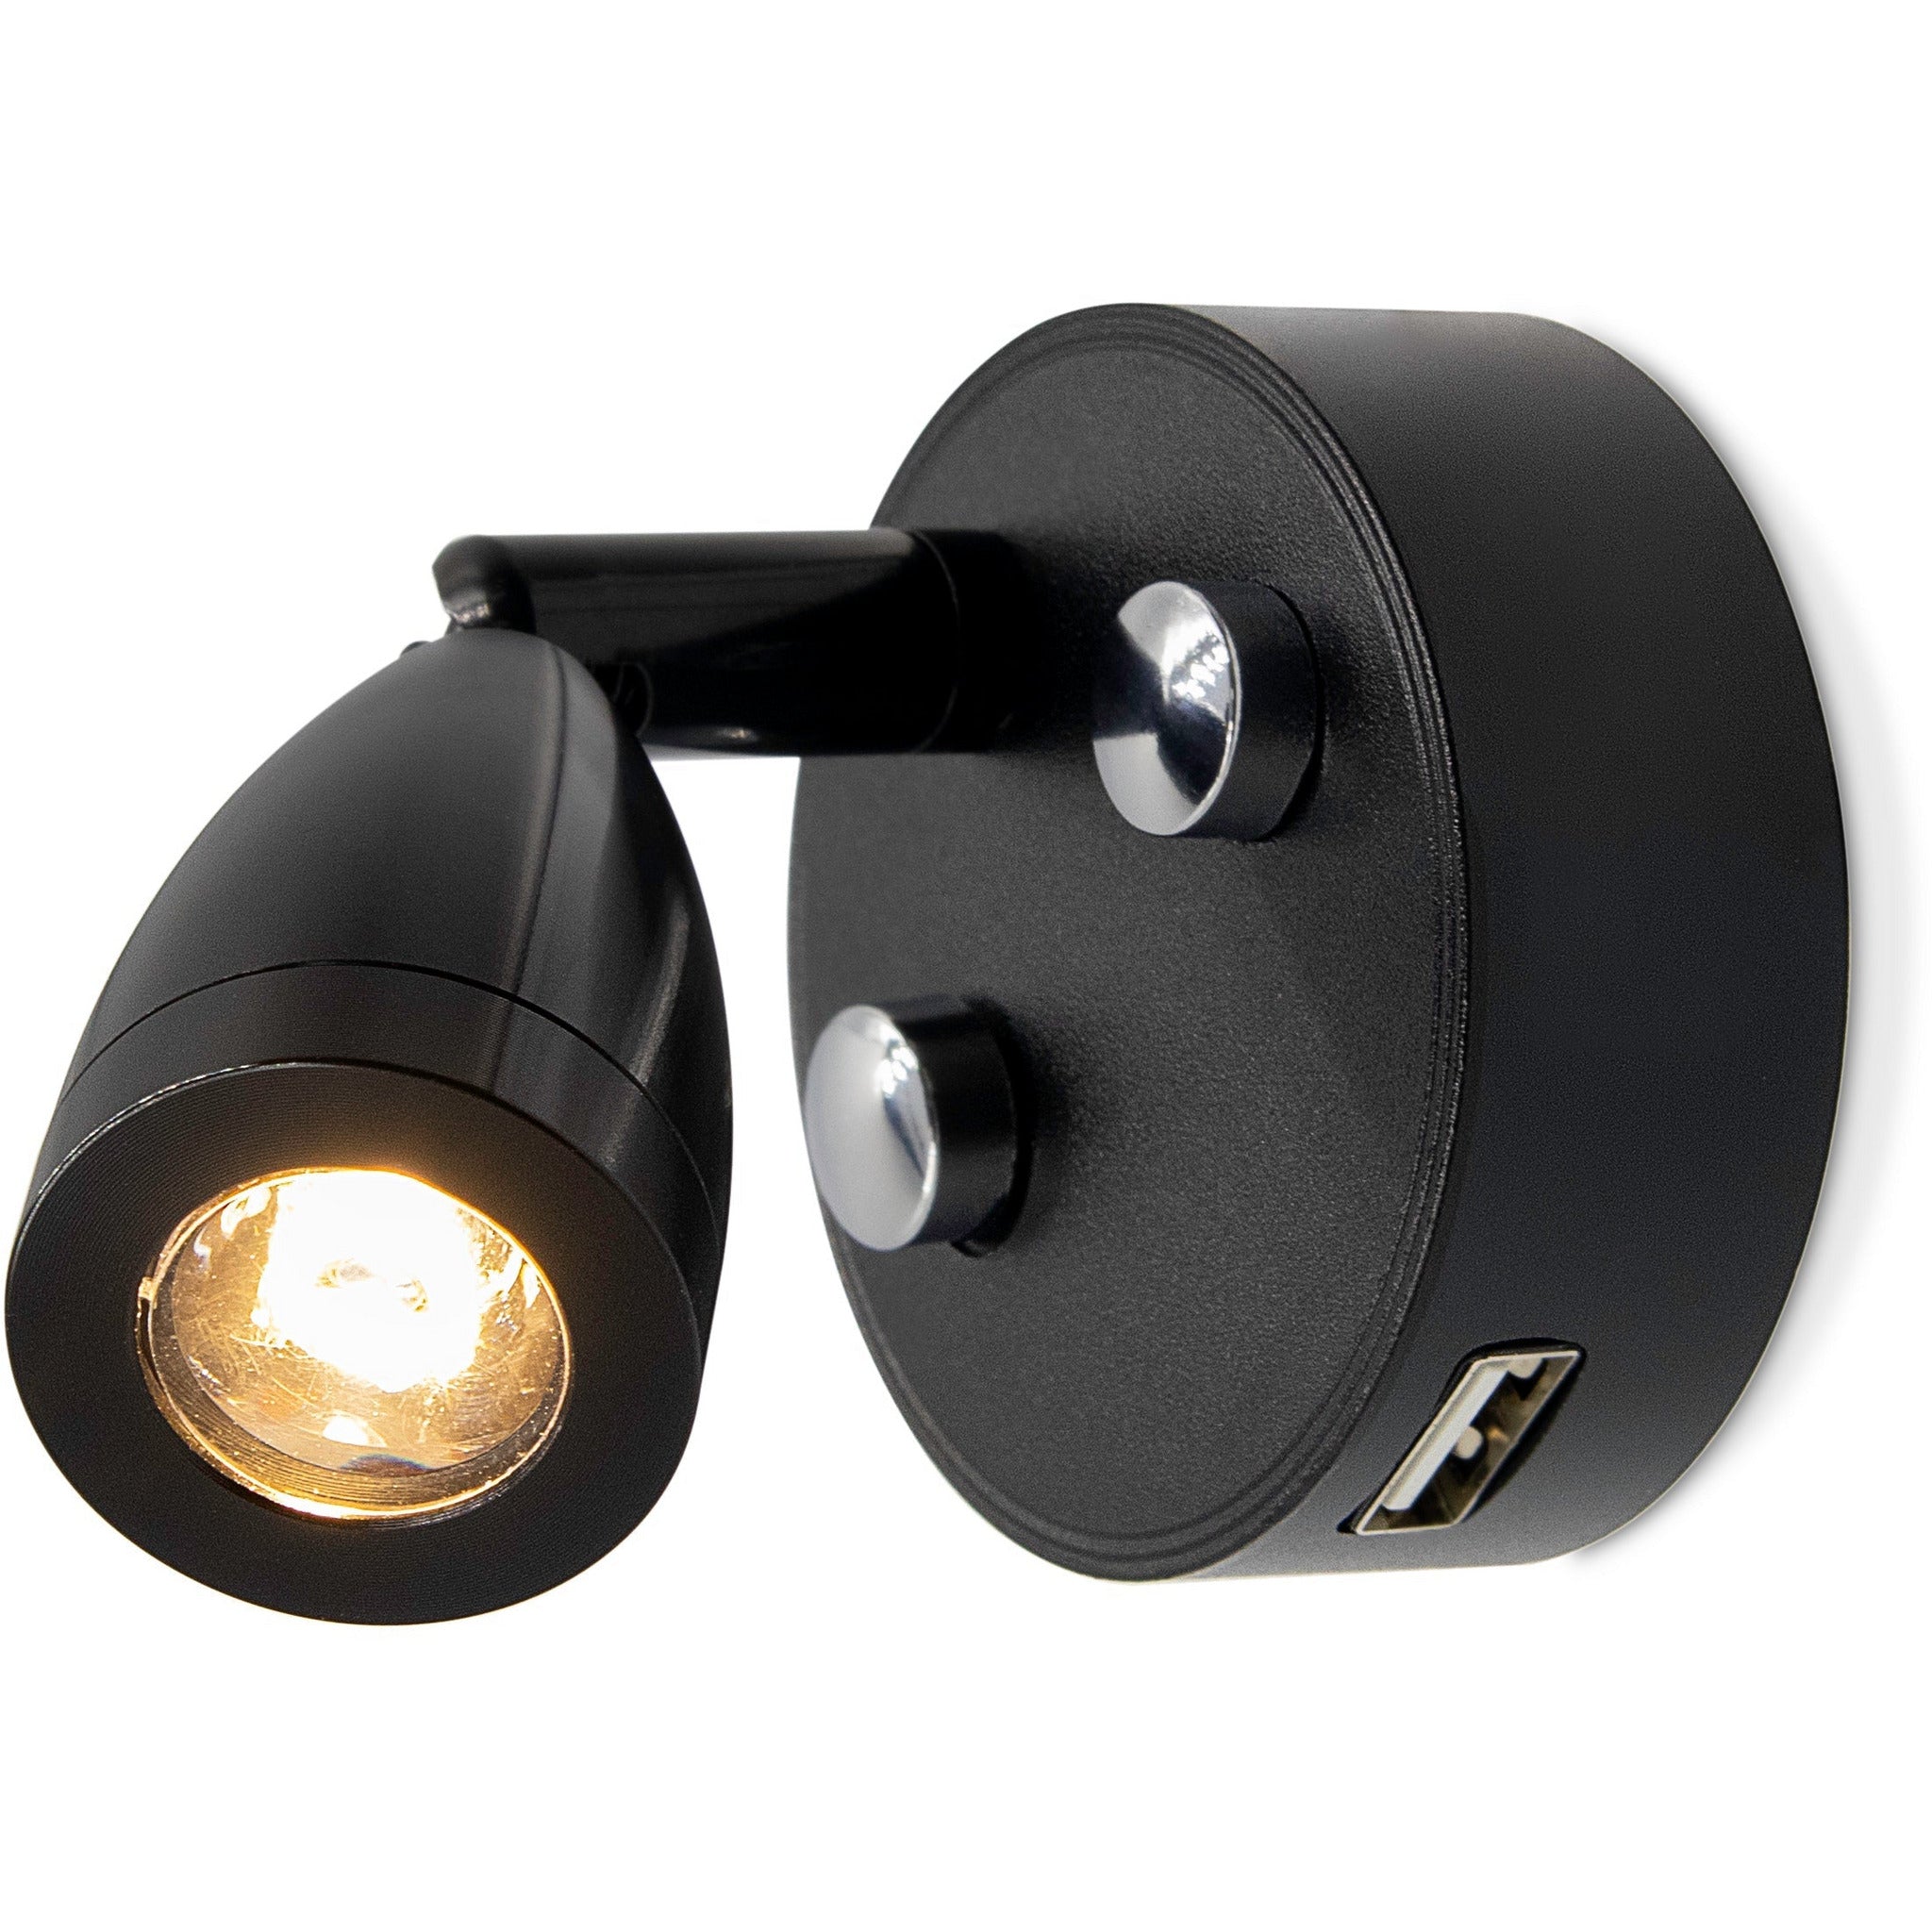 Black LED 280mm Spotlight with USB - Dimmable, Touch On/Off (Warm White) Kiravans 